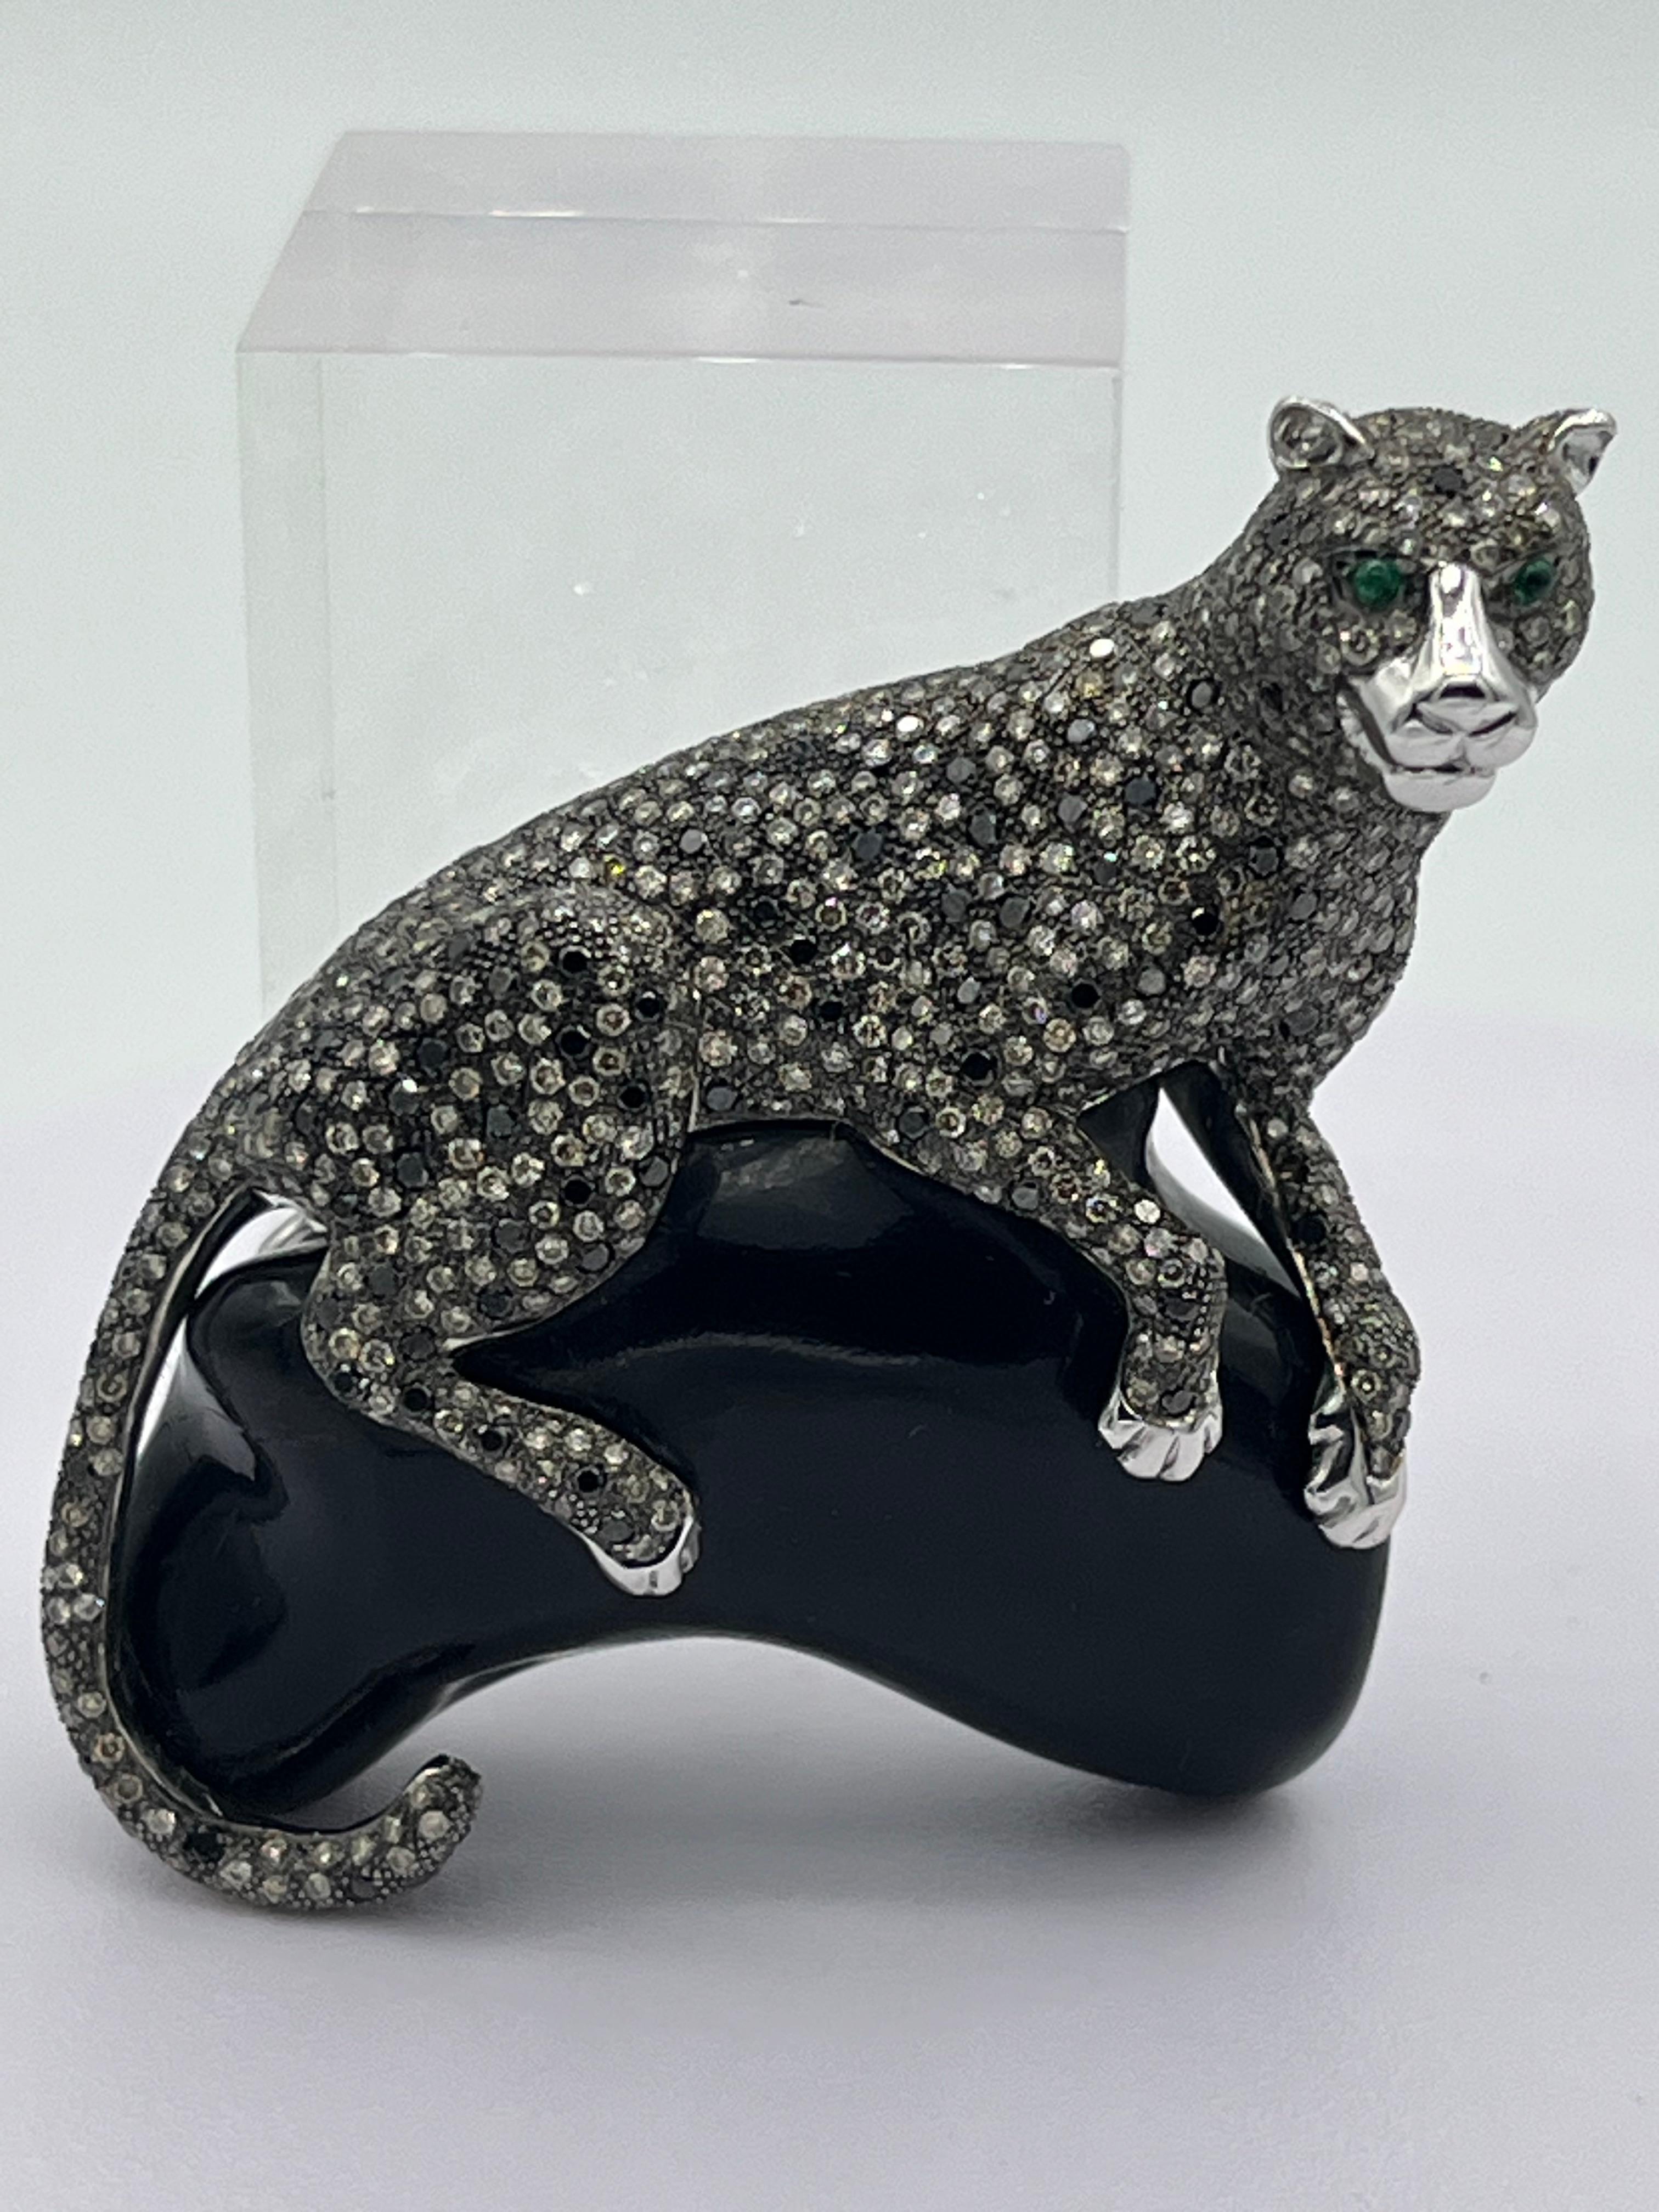 This brooch are beautiful the panther is sitting on a black stone, the panther is set with 5,53 ct brown and 1,15 ct black diamonds . the eyes are 0,05 ct emerald
the size is ca. 6 x 5,5 cm
weight is 54,4 grams
hallmarked 750 
it is white gold